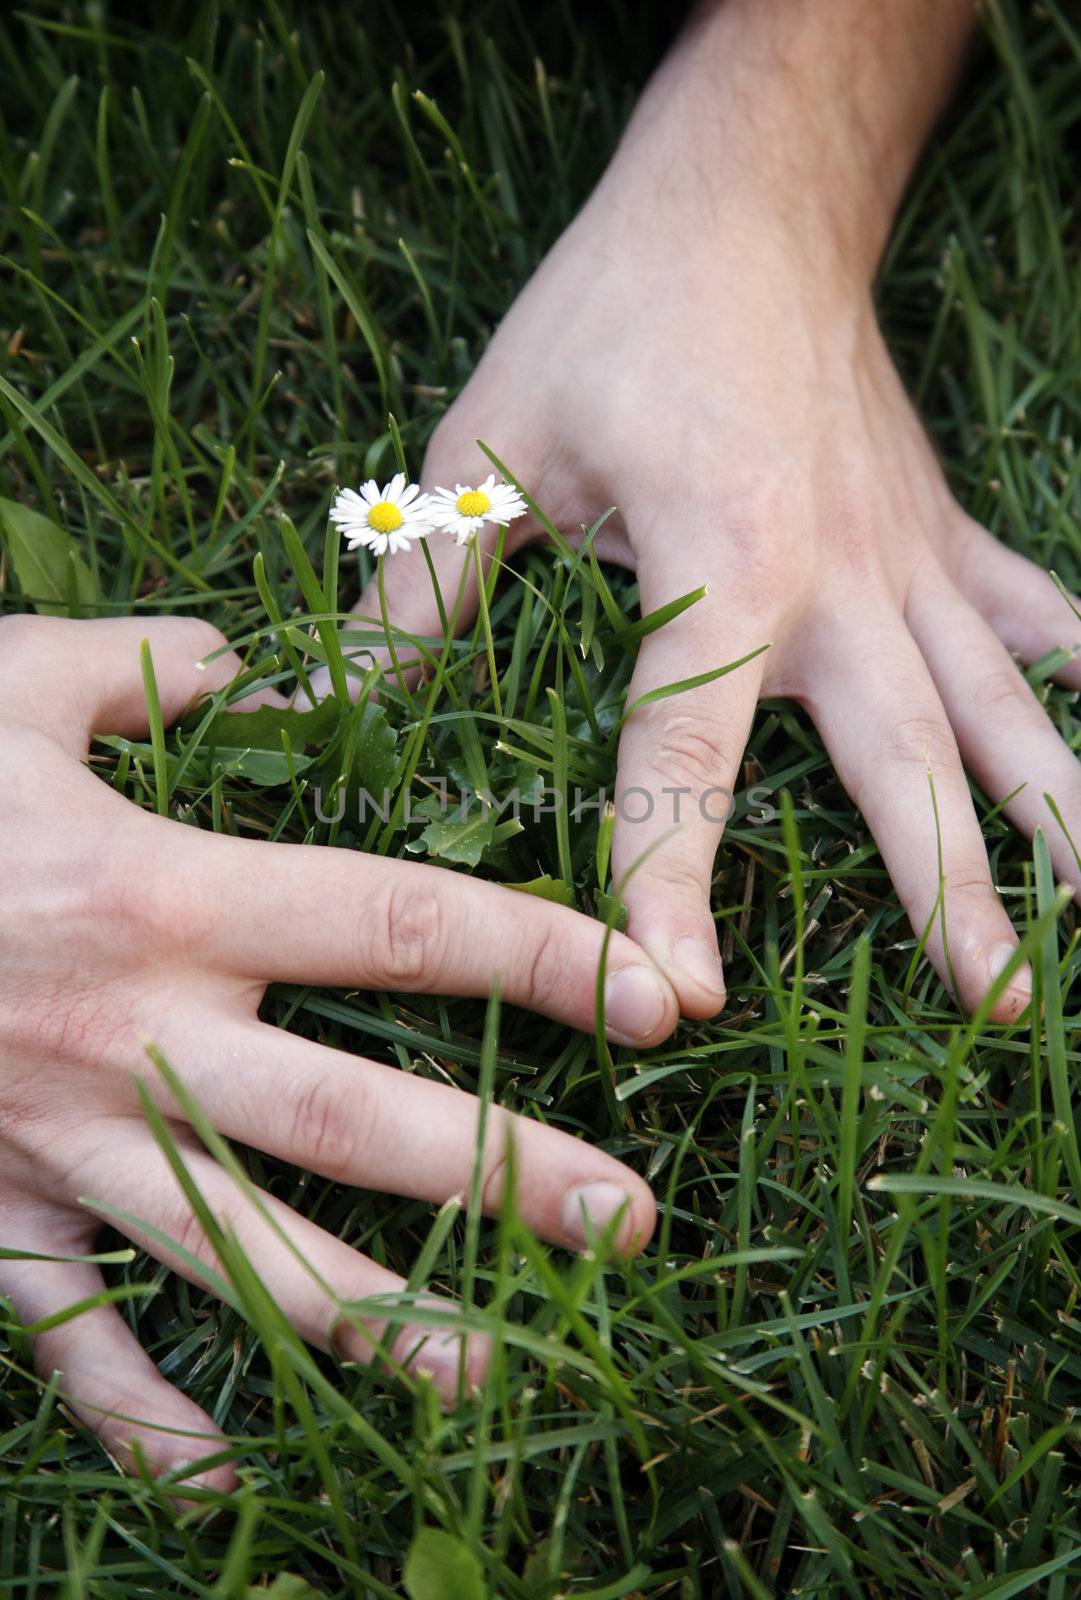 Hands of the man as heart, in the middle two small daisies